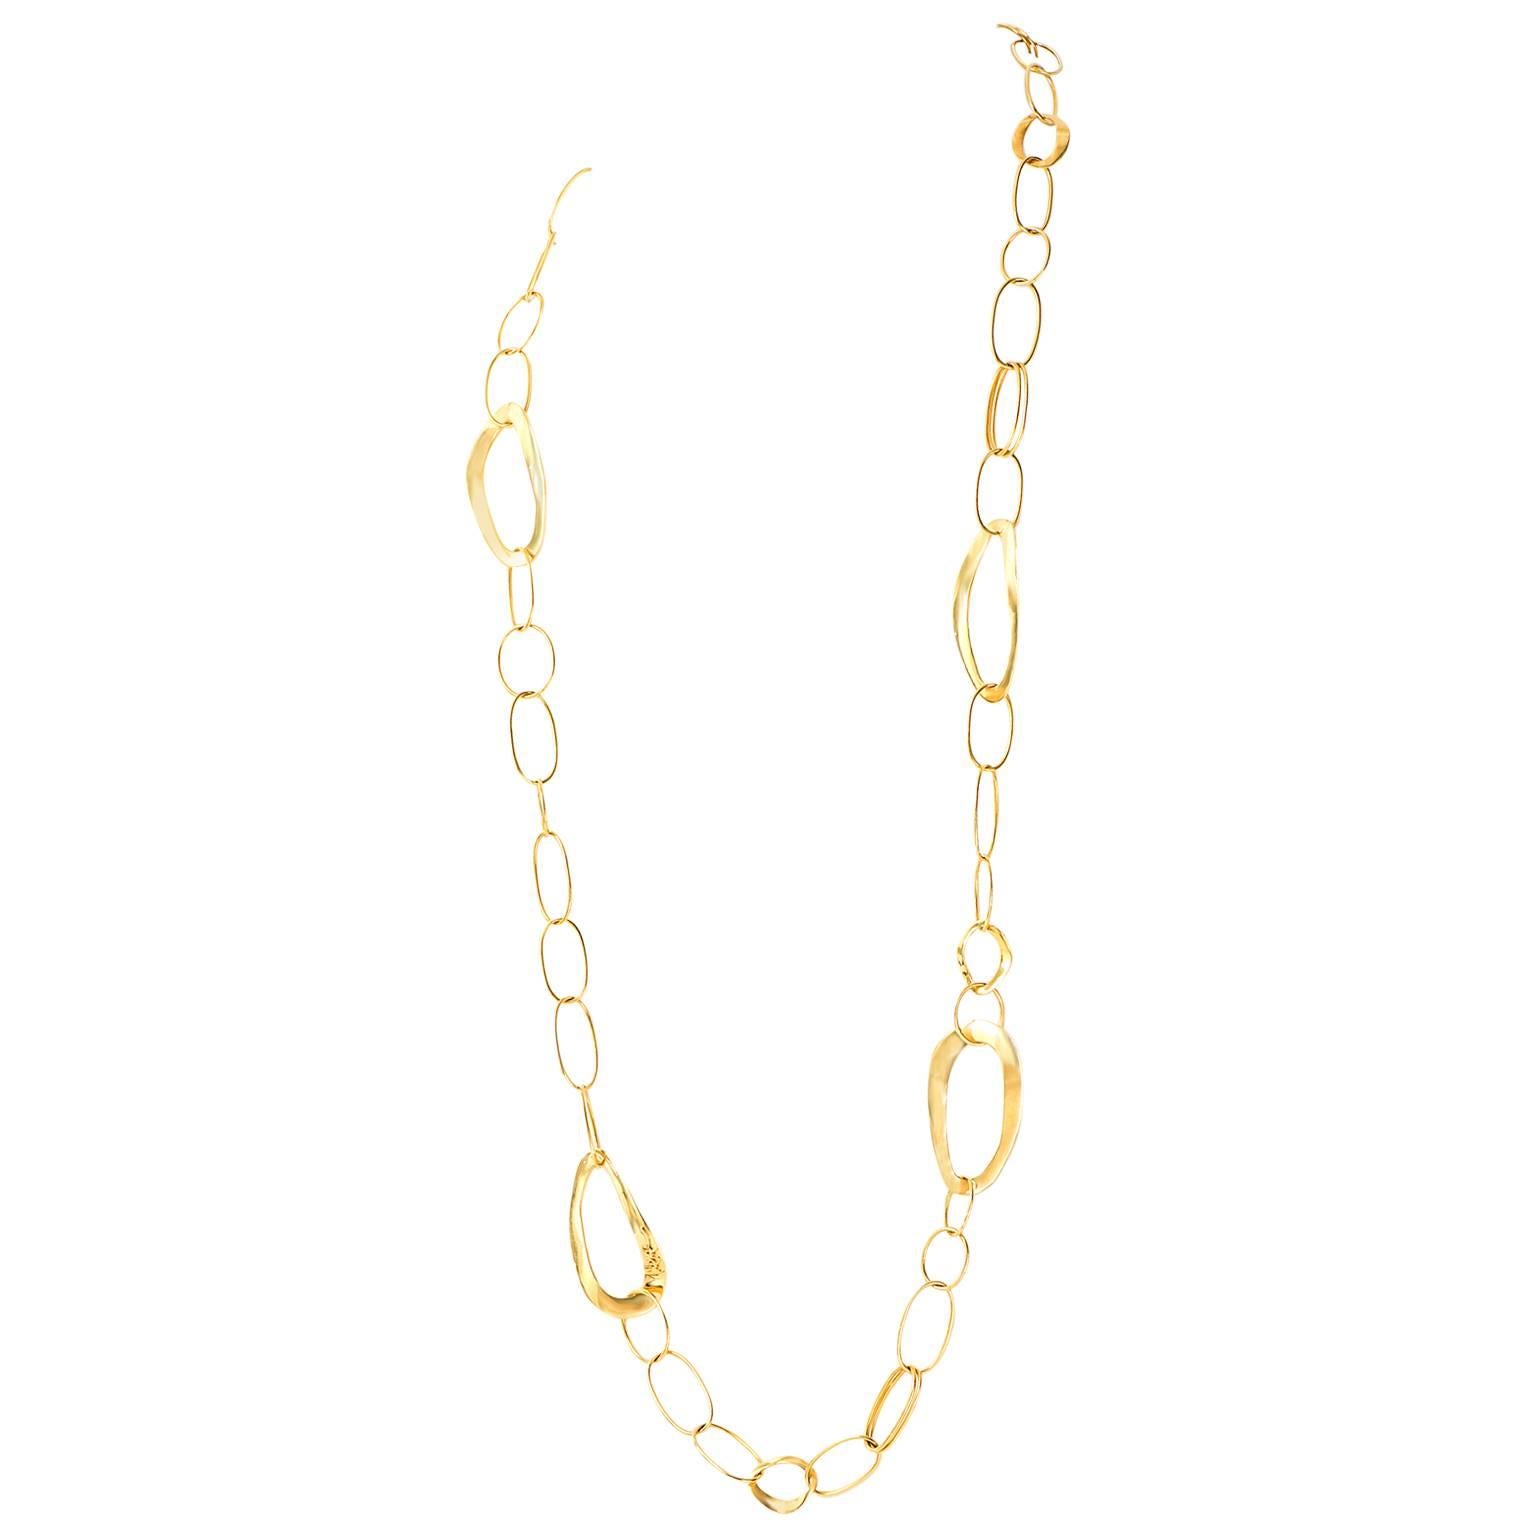 Contemporary, 18k, by Ippolita, New York, New York.  This striking 40-inch-long chain necklace personifies Ippolita’s trademark essence of modern, sculptural cool. The organically chic look is composed of heavy wire ovals interspersed with thick